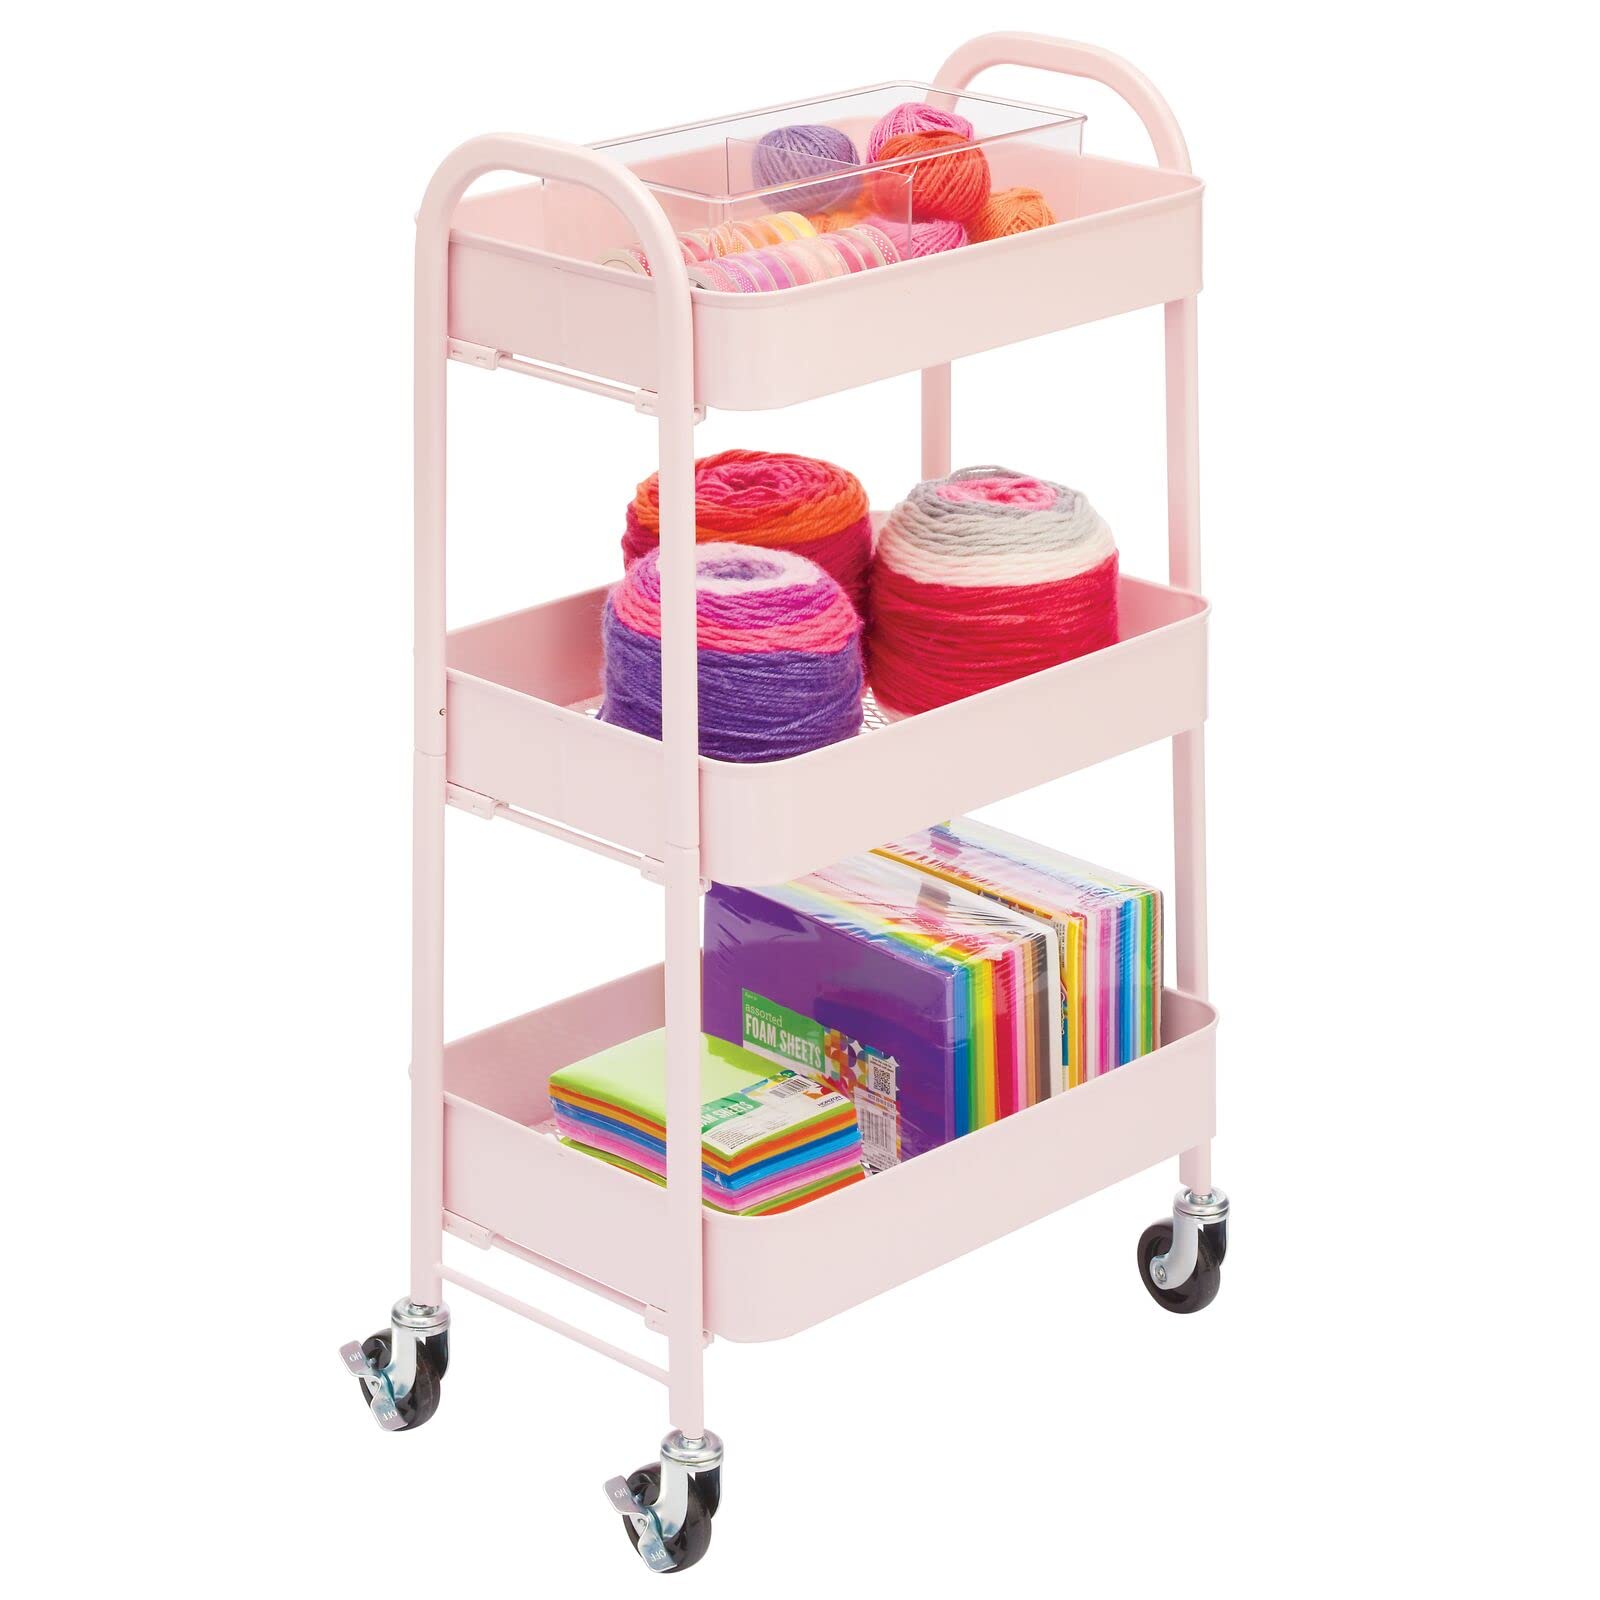 mDesign Metal 3-Tier Rolling Utility Storage Carts - Organizer Trolley for Bathroom, Kitchen, Laundry, Office, and Kids Rooms - Heavy Duty Caddy with 4 Caster Wheels - Light Pink